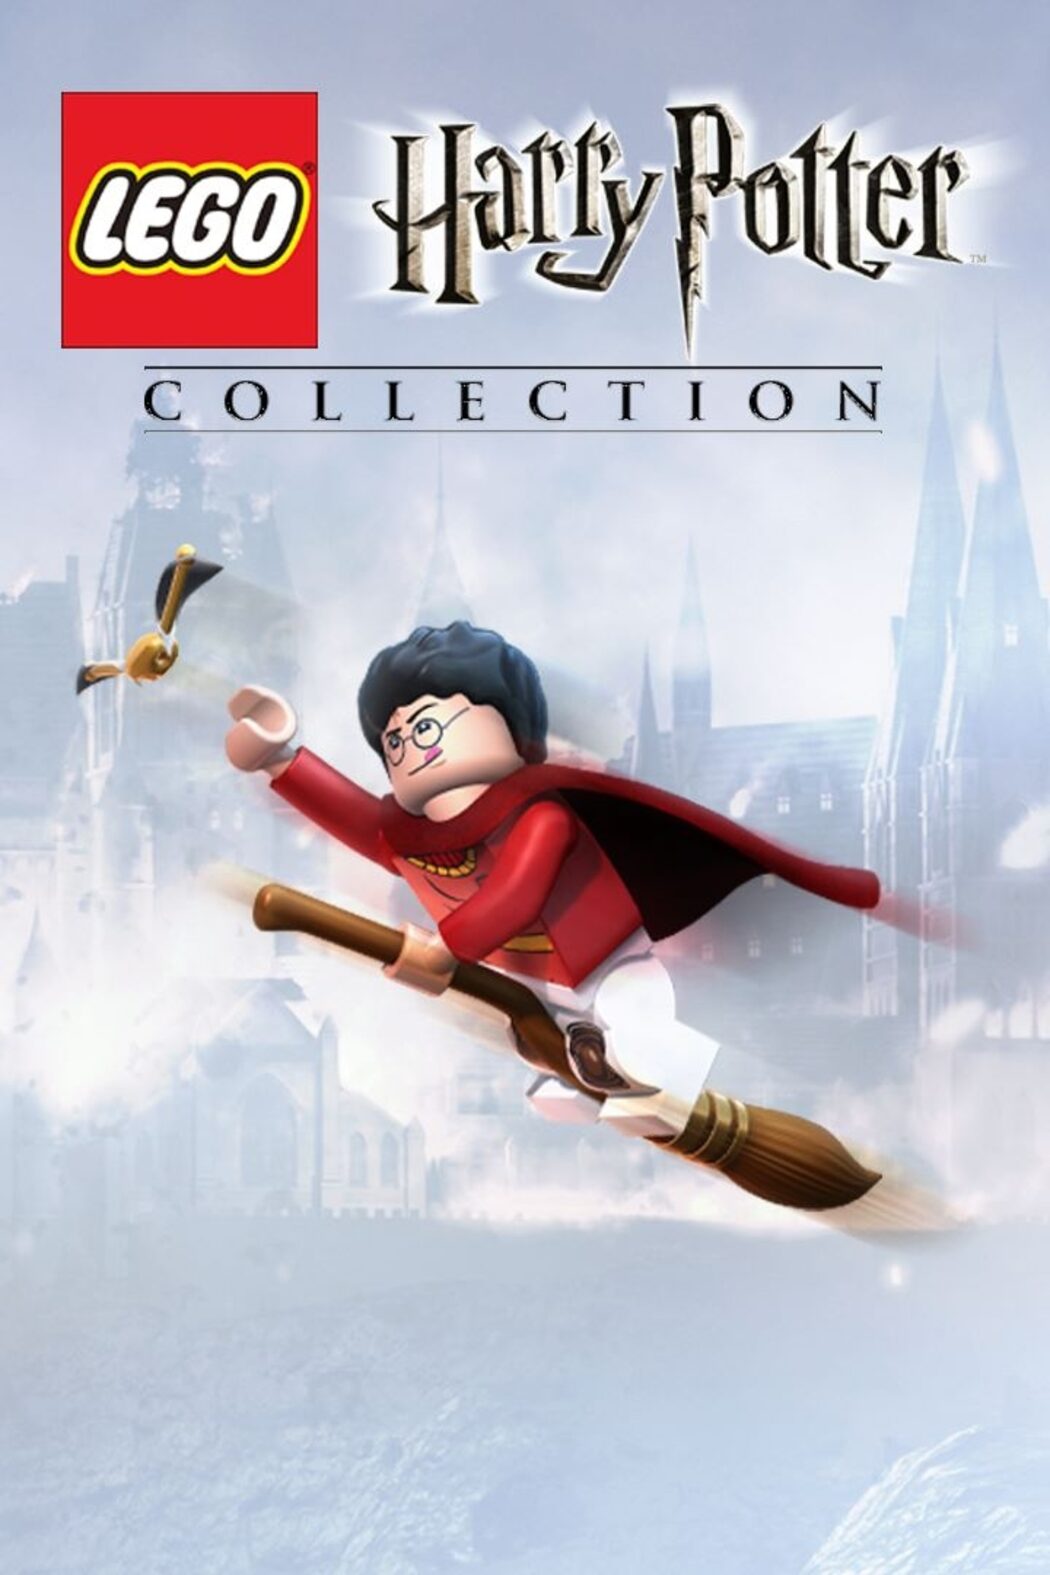 Lego Harry Potter: Years 1-4 Steam Key for PC - Buy now